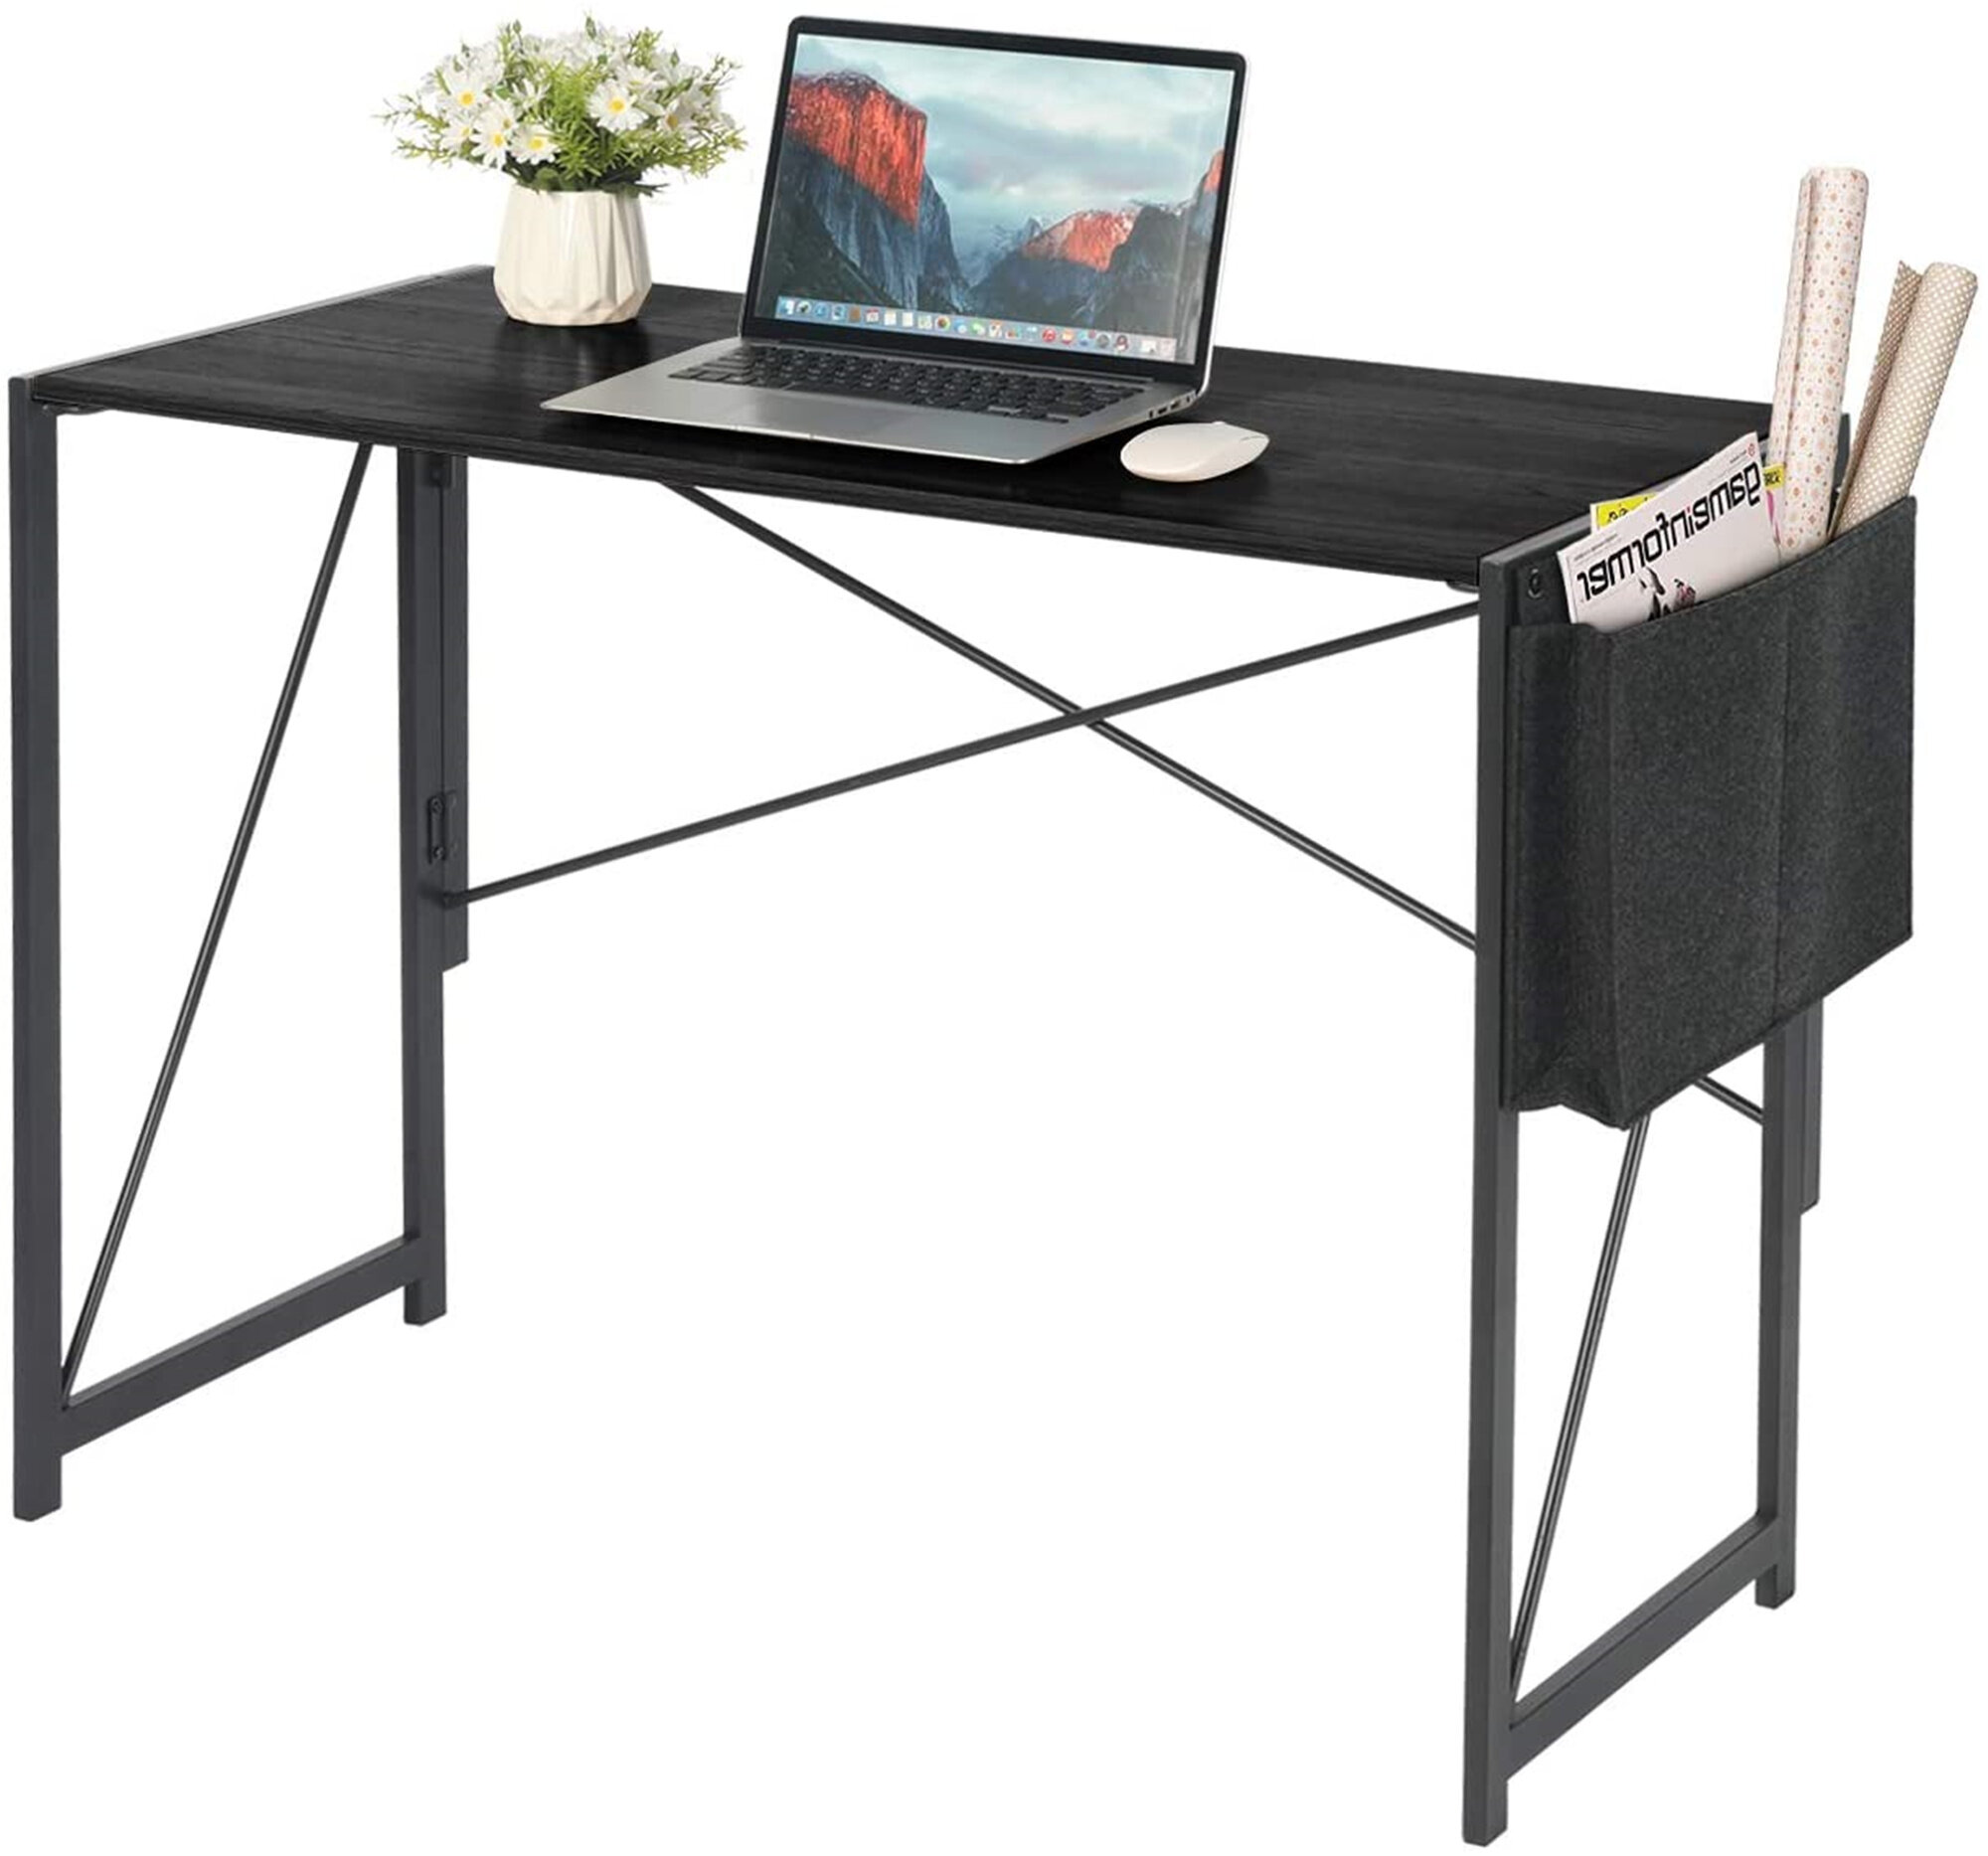 Adjustable Notebook Computer Desk Folding Laptop PC Table Home Office Study Gift 